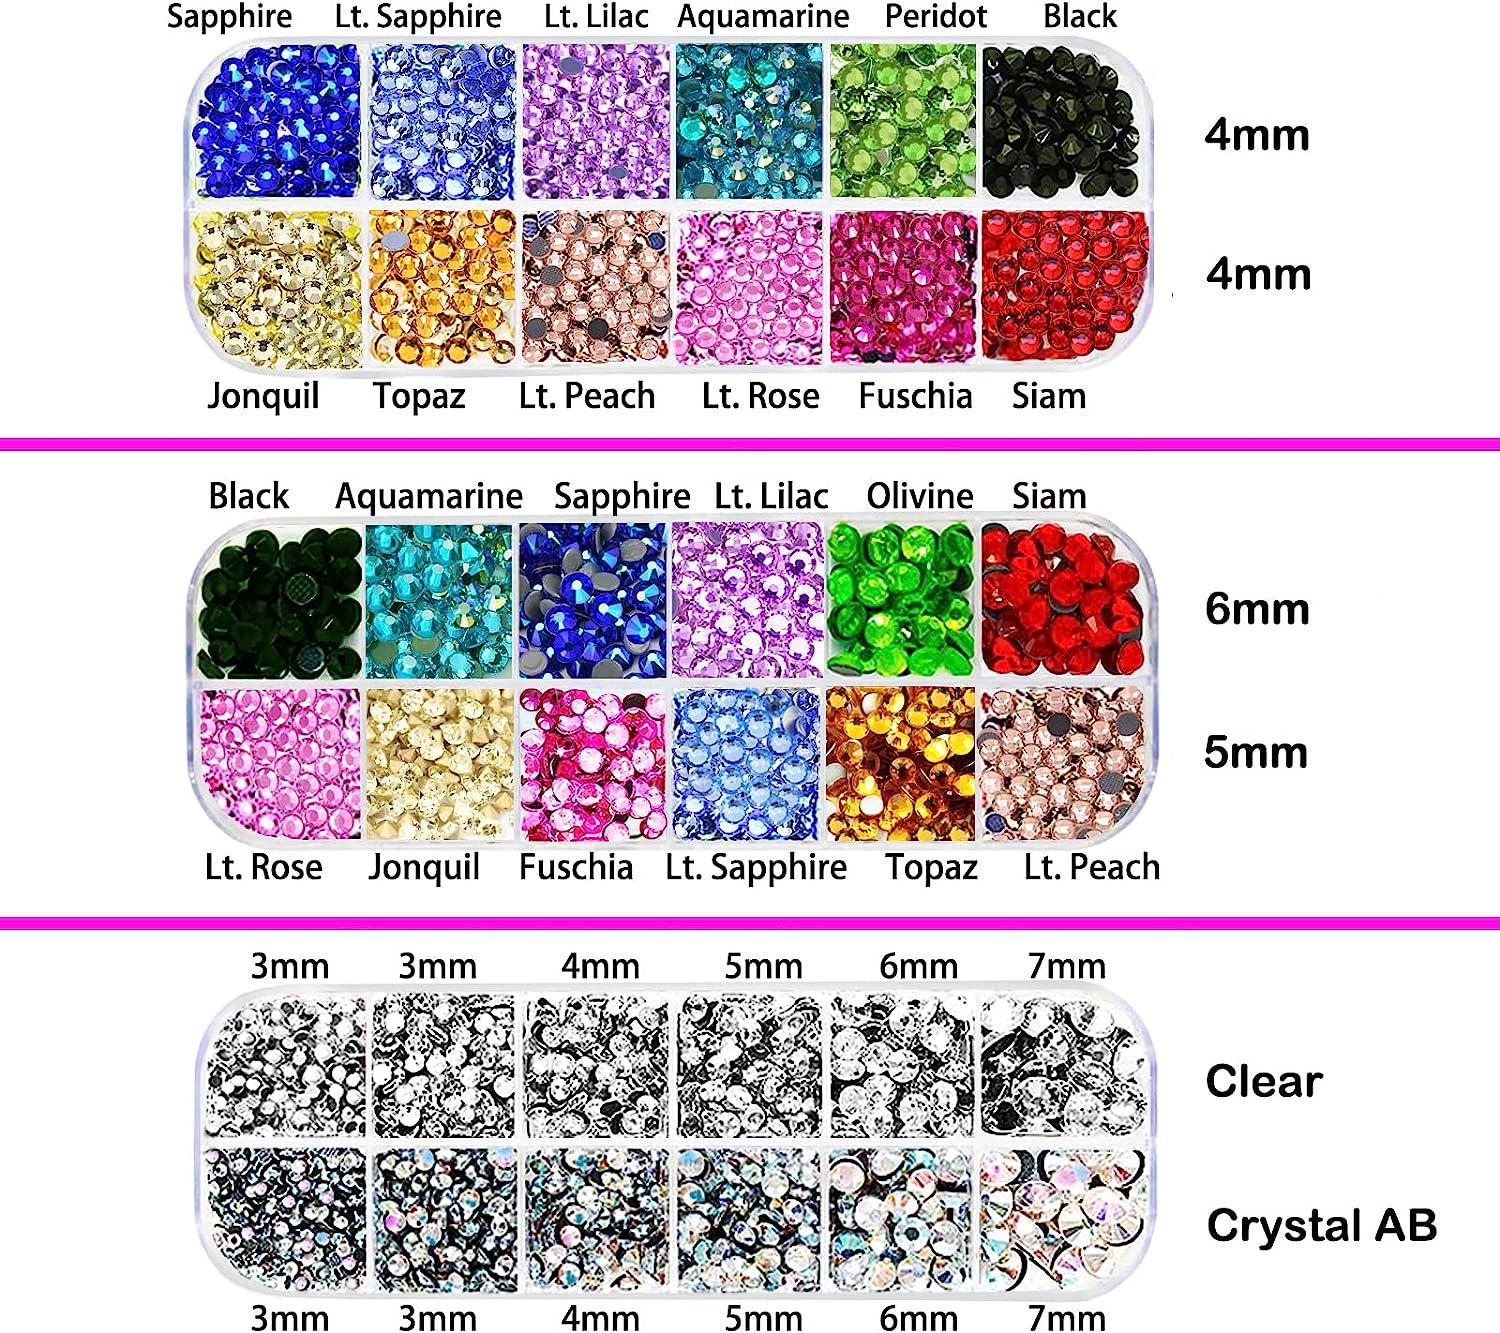 Hotfix Applicator Rhinestone, Larger Hot Fixed Rhinestones Applicator Tool Pen Kit, Bedazzler Kit with Rhinestones for Clothes Crafts, 19 Color Gems